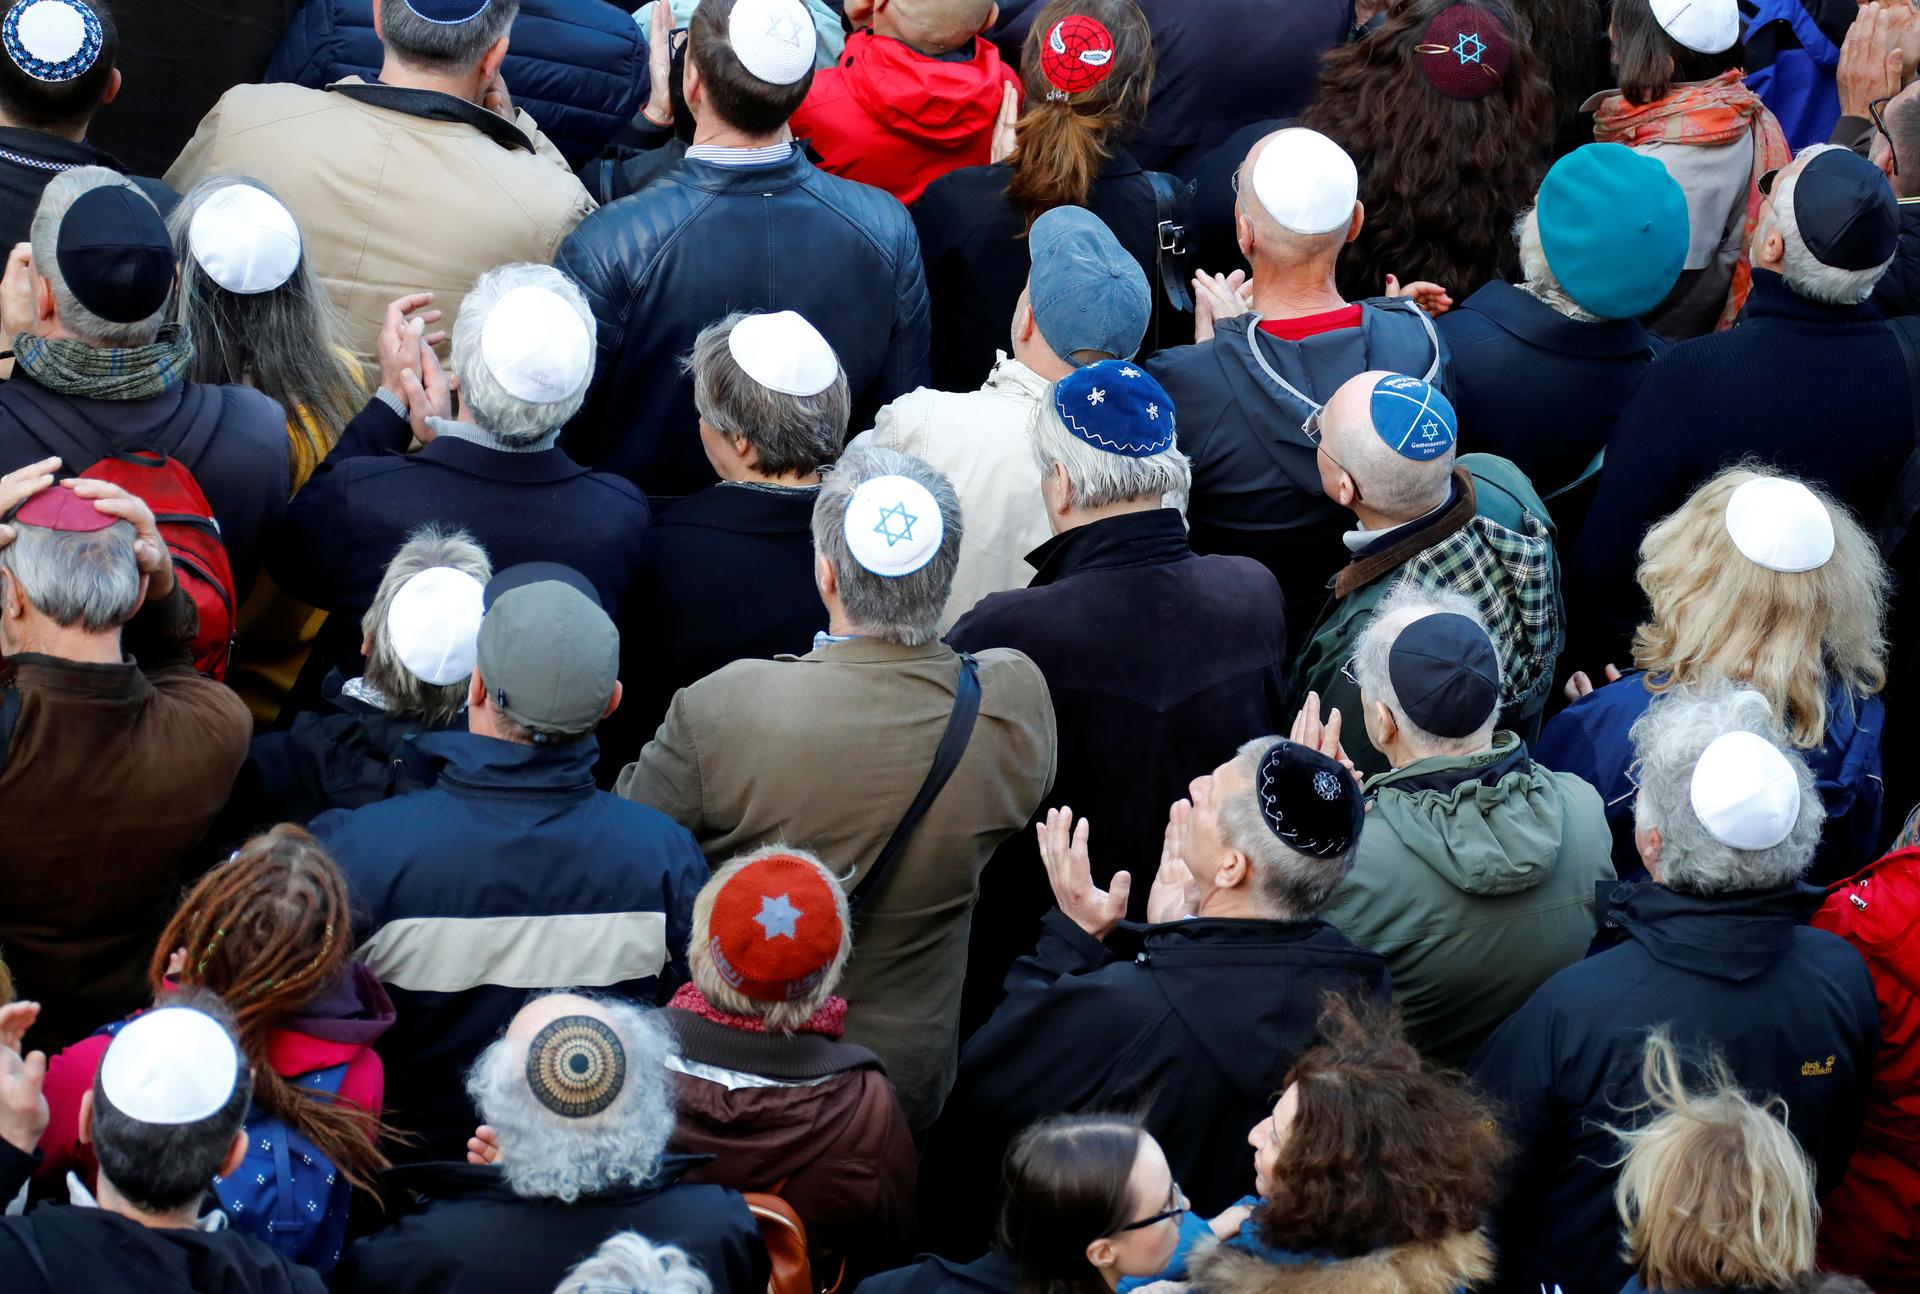 People from different faiths wear kippas as they attend a demonstration on April 25th in front of a Jewish synagogue, to denounce an anti-Semitic attack on a young man wearing a kippa in Berlin earlier in the month.